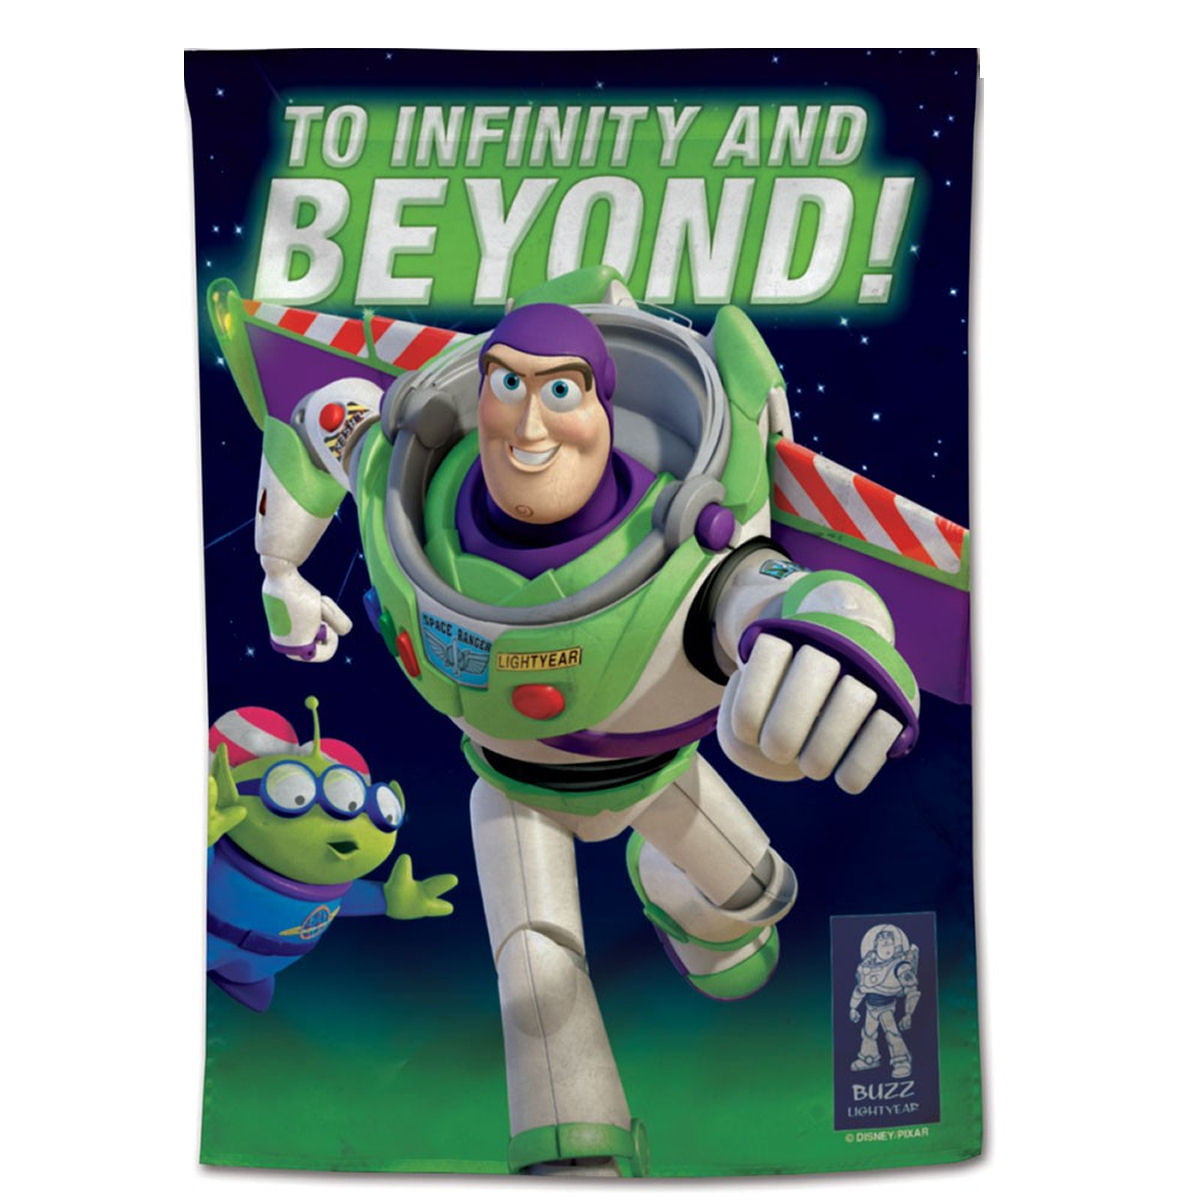 "To infinity... and beyond! 